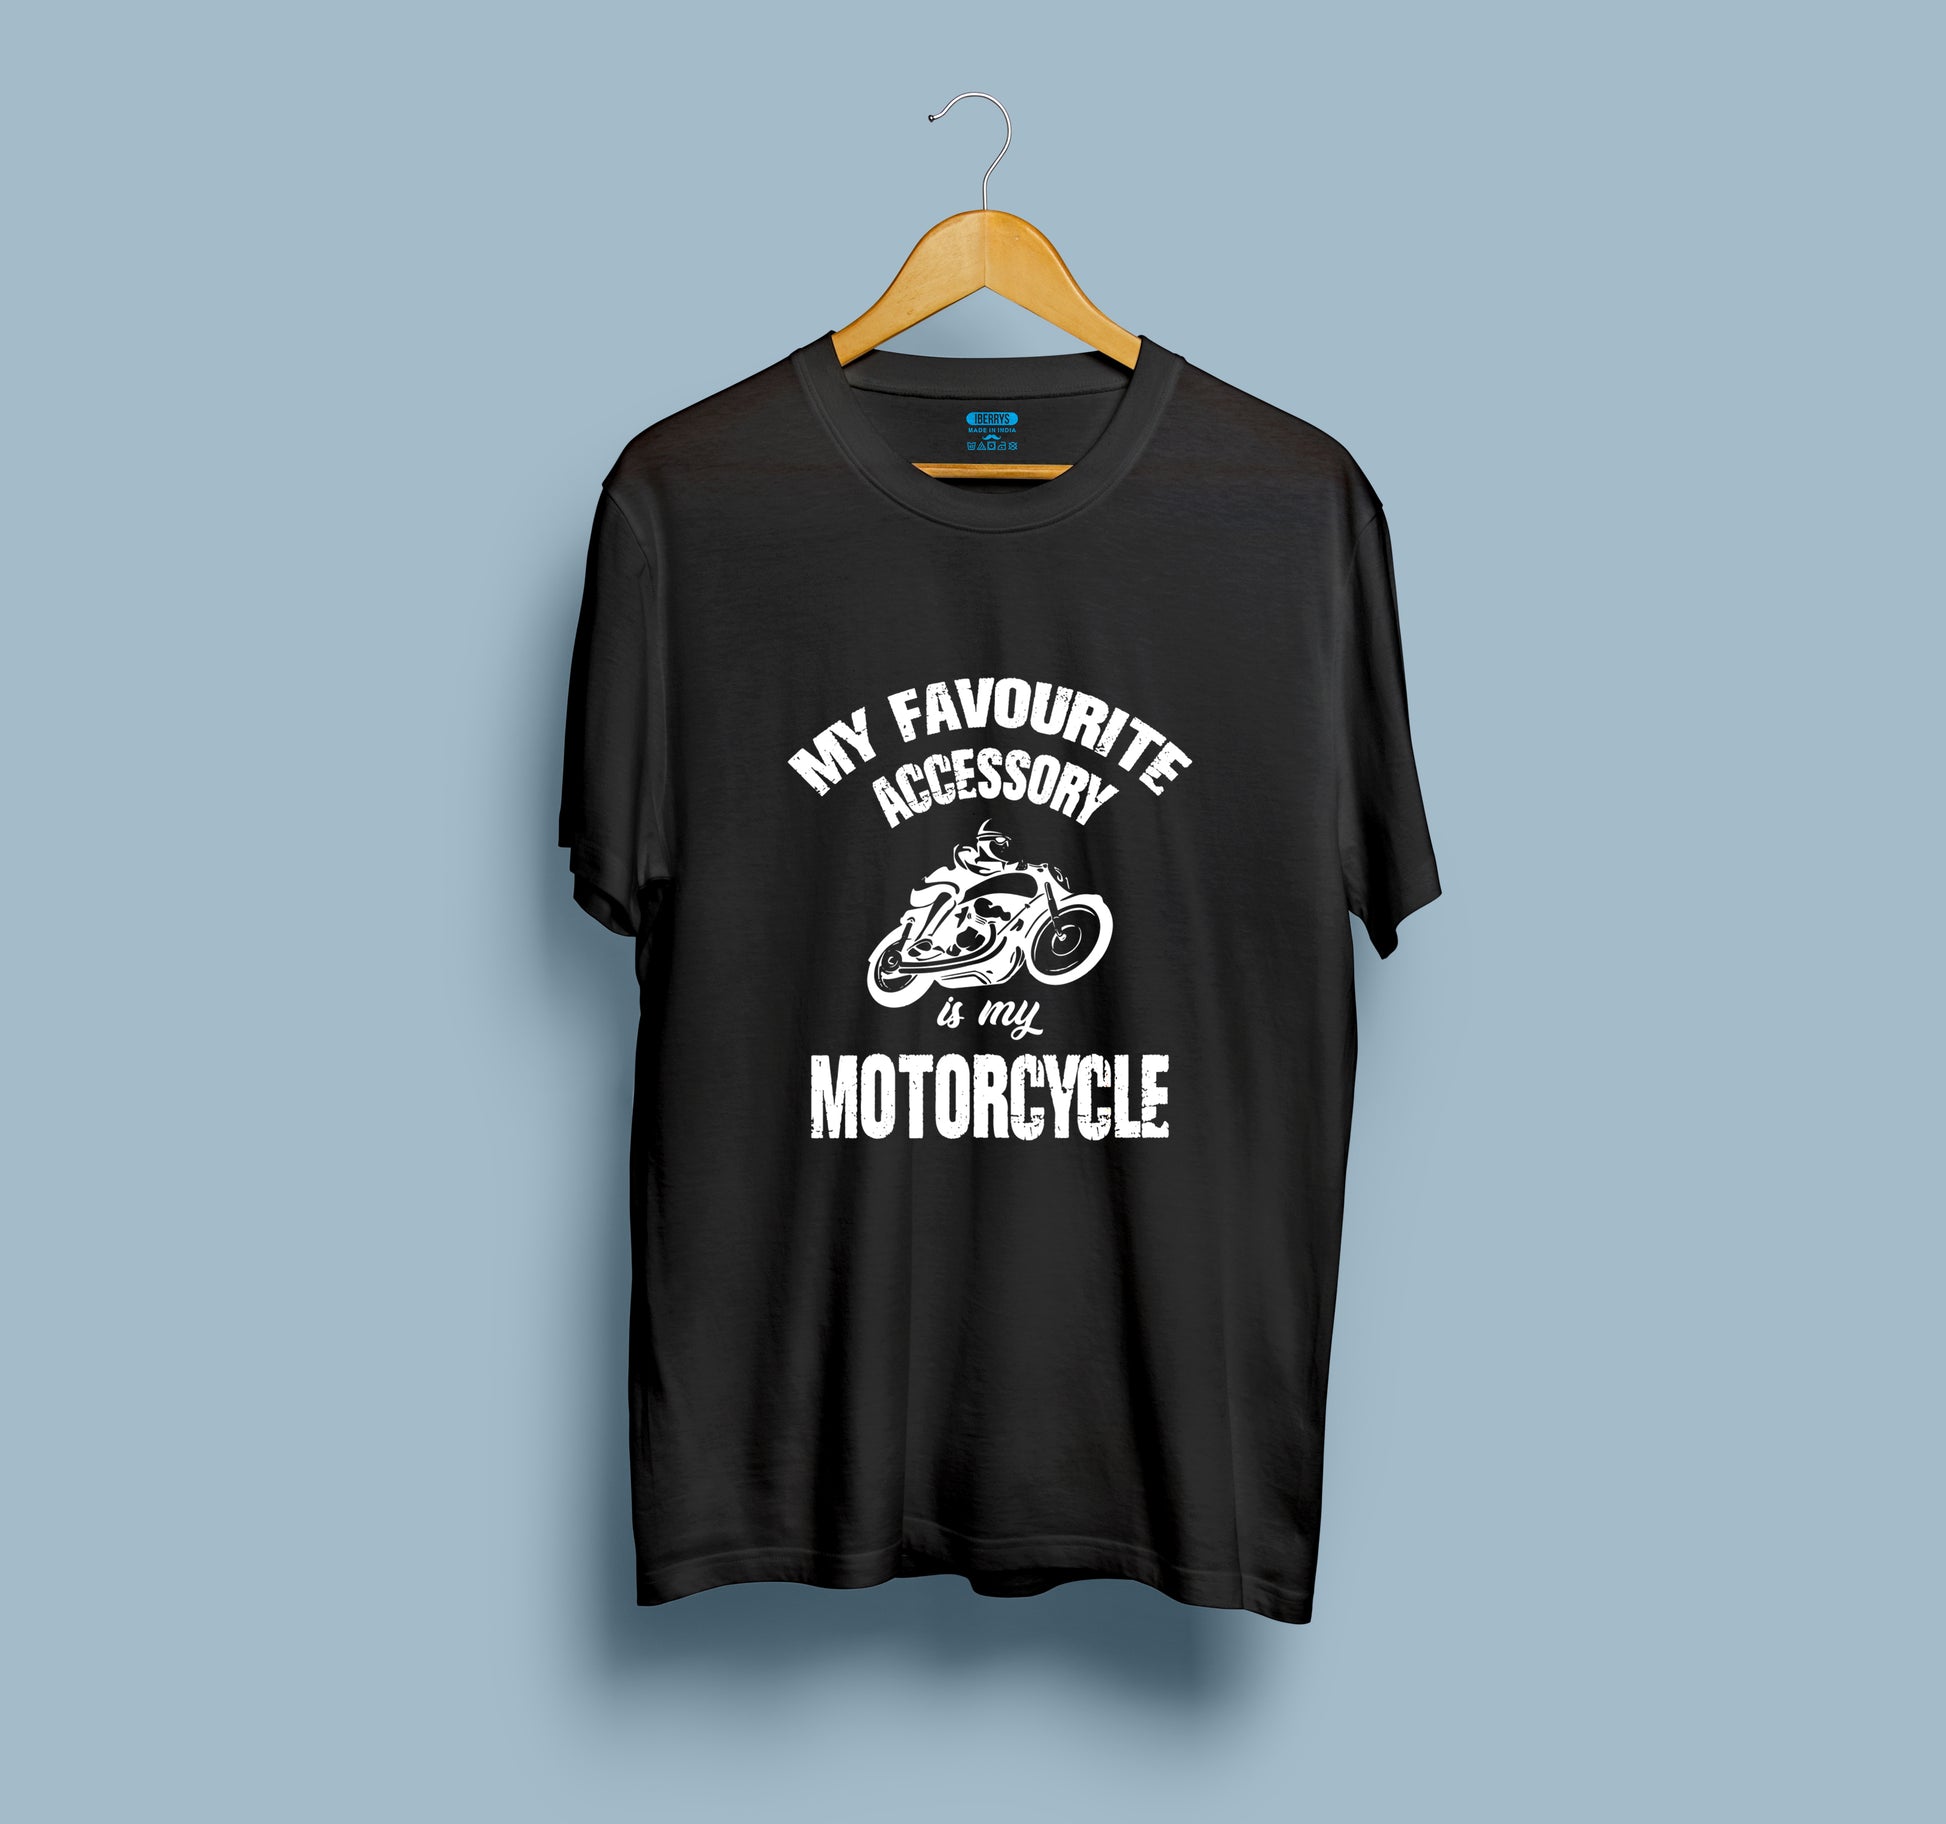 My favourite accessory is my motorcycle Biker t shirts - Black